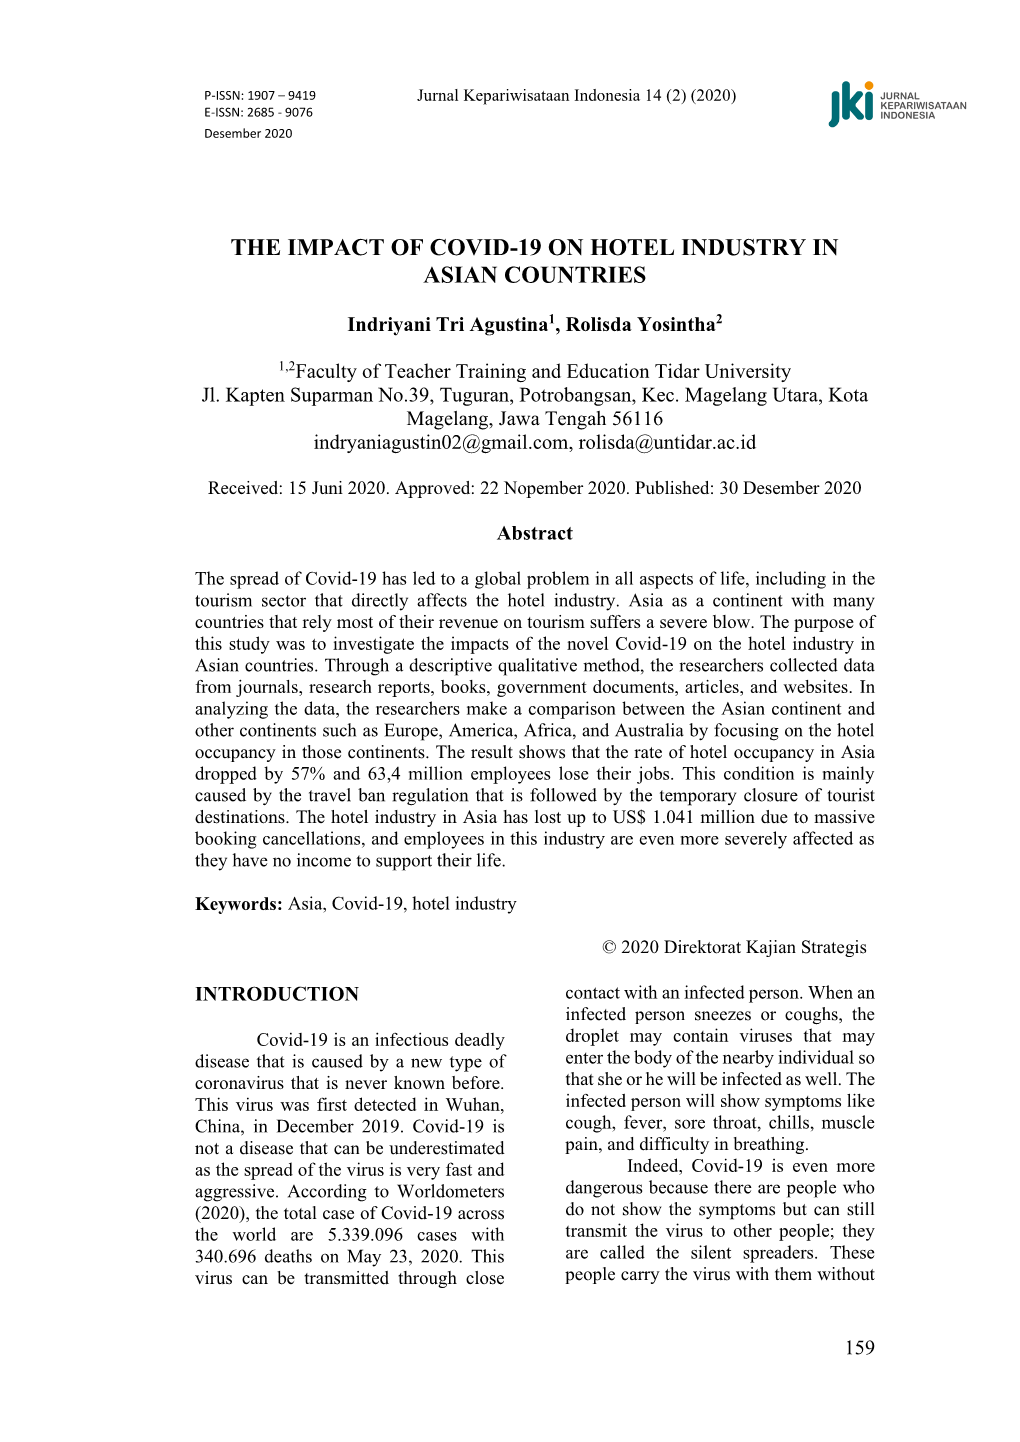 The Impact of Covid-19 on Hotel Industry in Asian Countries